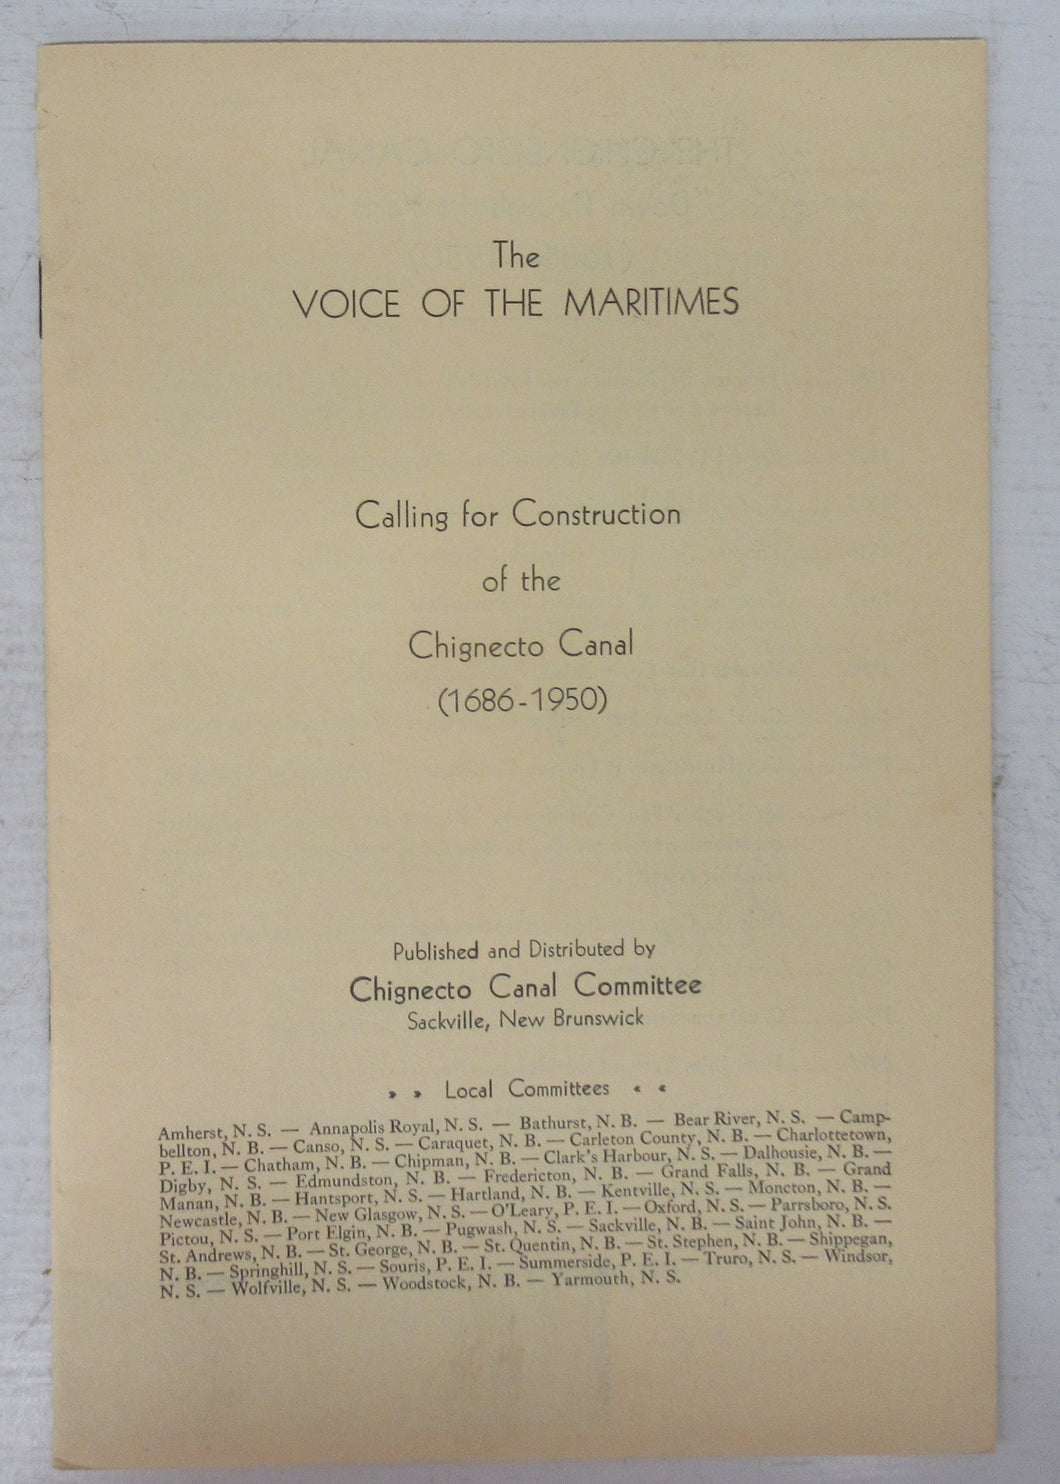 The Voice of the Maritimes: Calling for Construction of the Chignecto Canal (1686-1950)